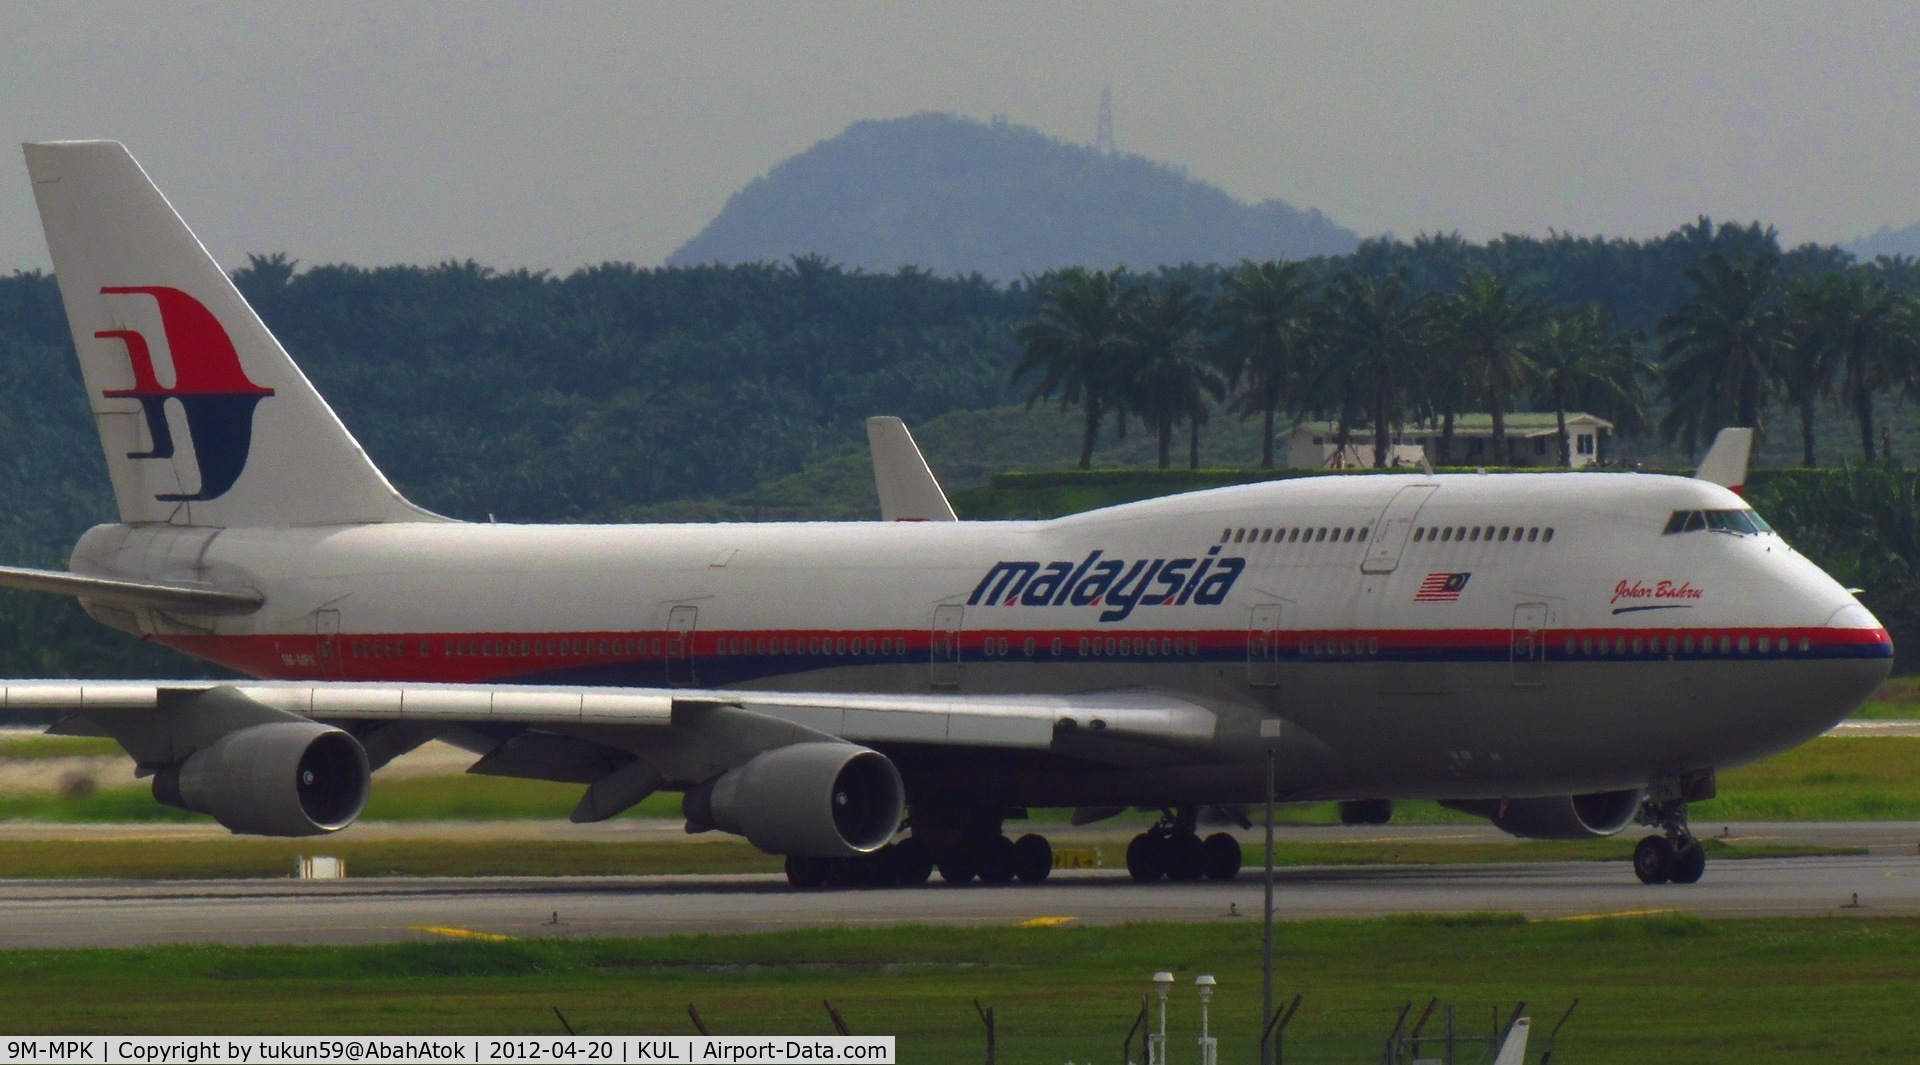 9M-MPK, 1998 Boeing 747-4H6 C/N 28427, Malaysia Airlines